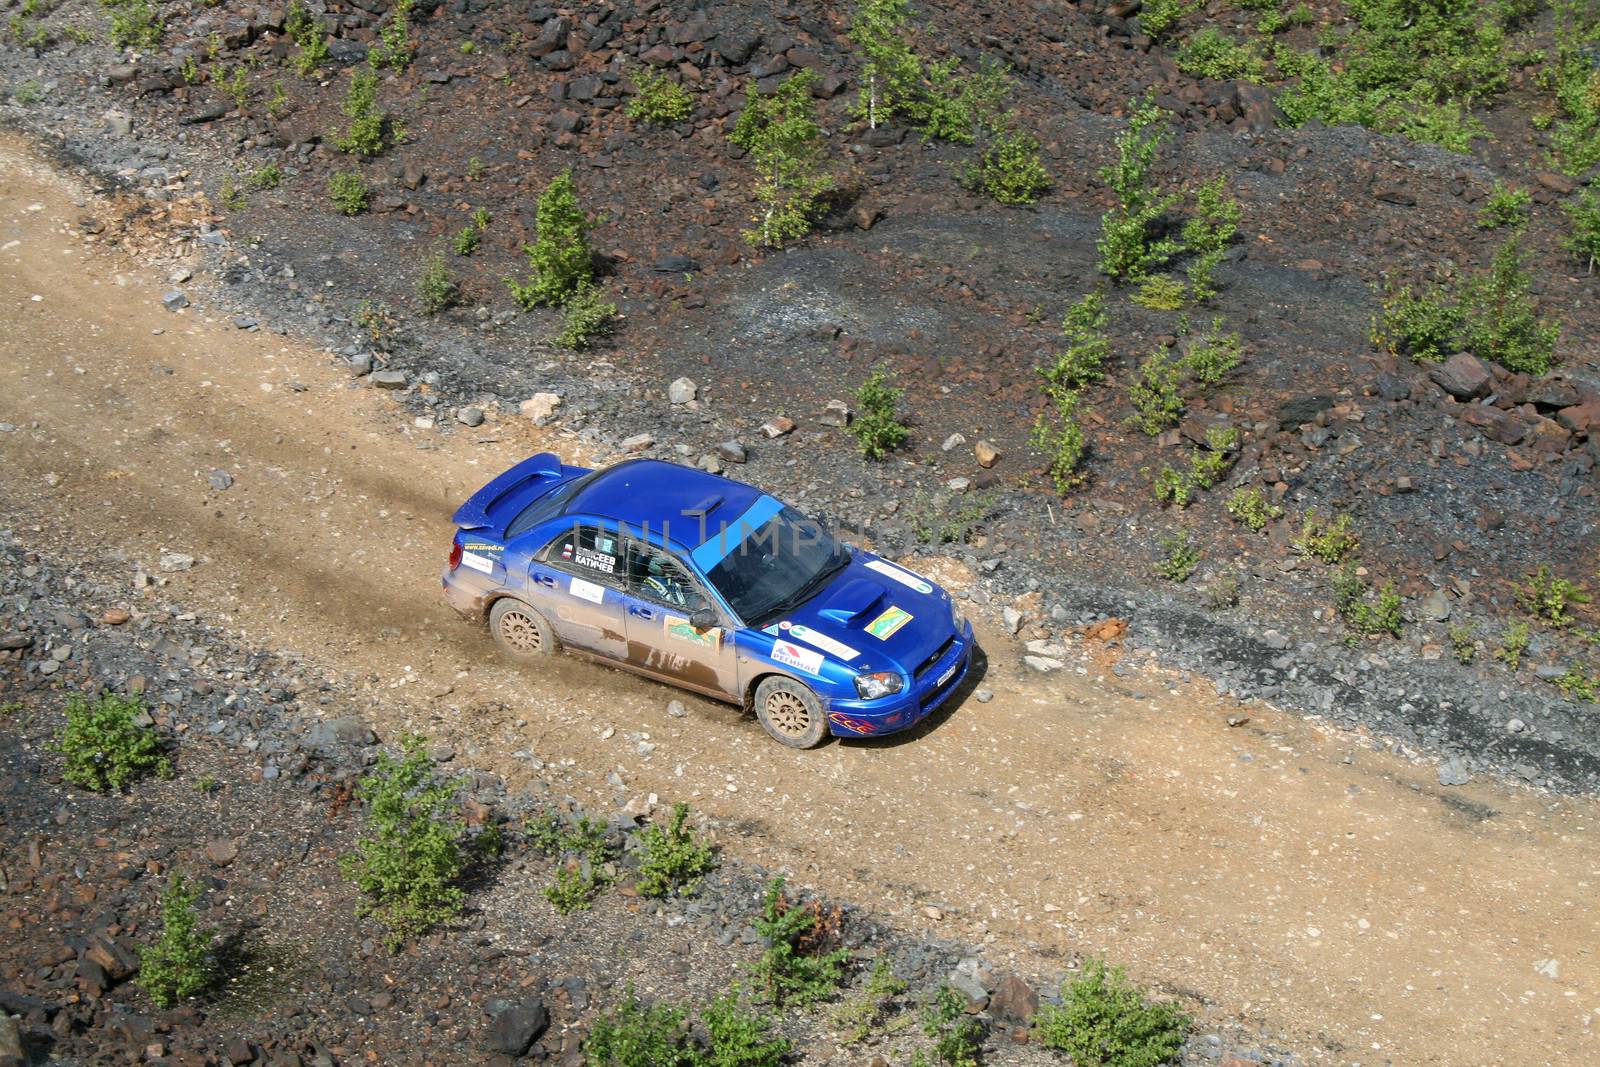 BAKAL, RUSSIA - AUGUST 8: Vitaliy Katichev's Subaru Impreza WRX (No. 38) competes at the annual Rally Southern Ural on August 8, 2008 in Bakal, Satka district, Chelyabinsk region, Russia.